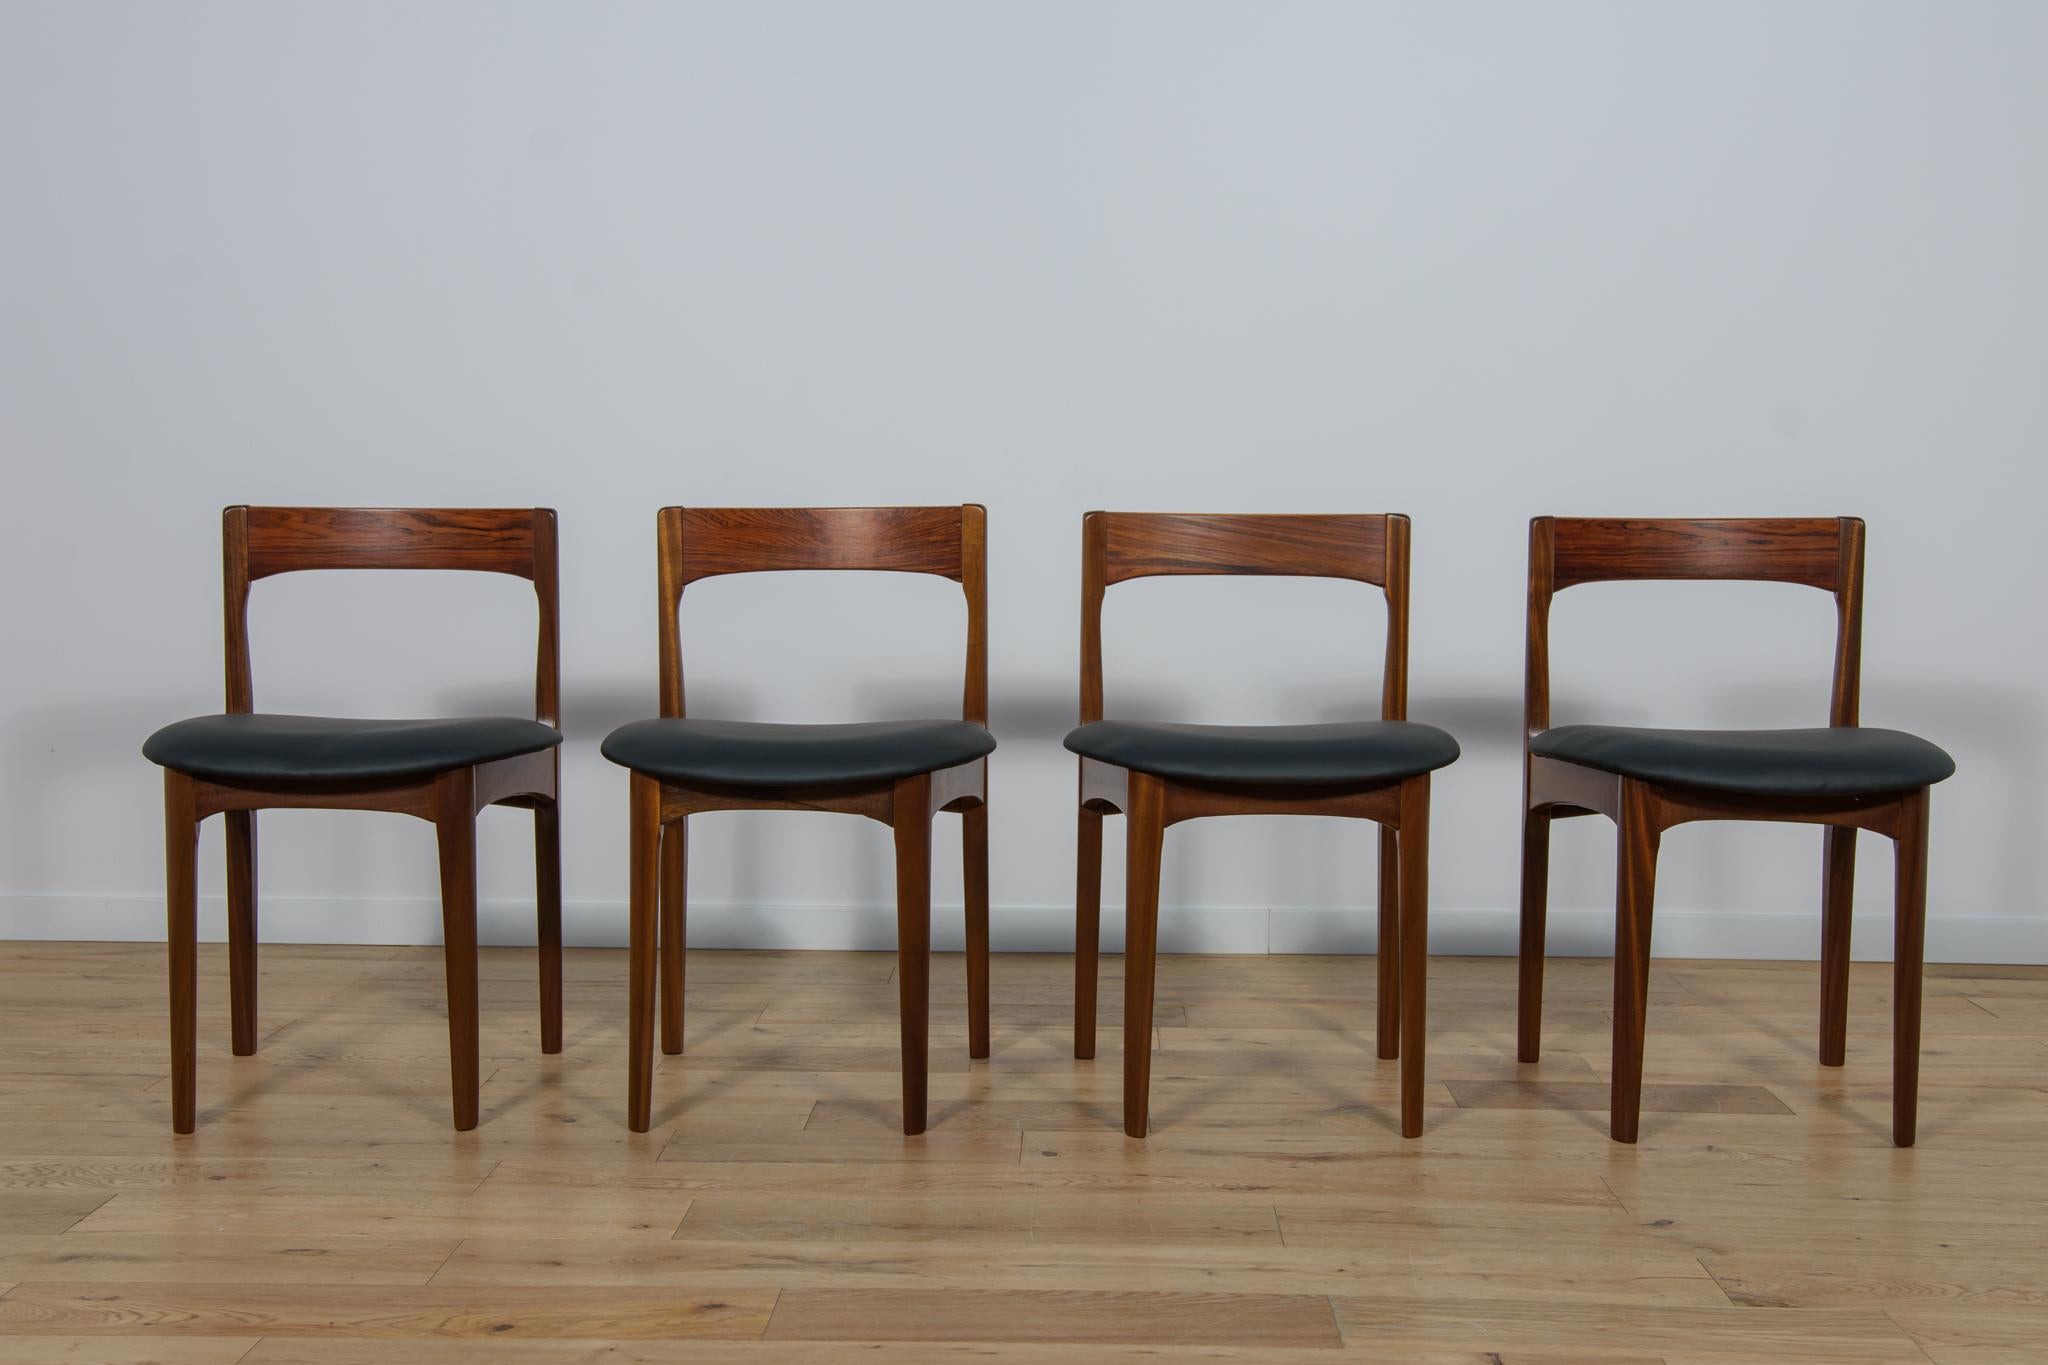 The set of four chairs was produced in Great Britain in the 1960s. The frame of the chairs is made of teak wood, the backrests are made of rosewood. The furniture has been thoroughly renovated, cleaned of old coatings, painted with rosewood stain,